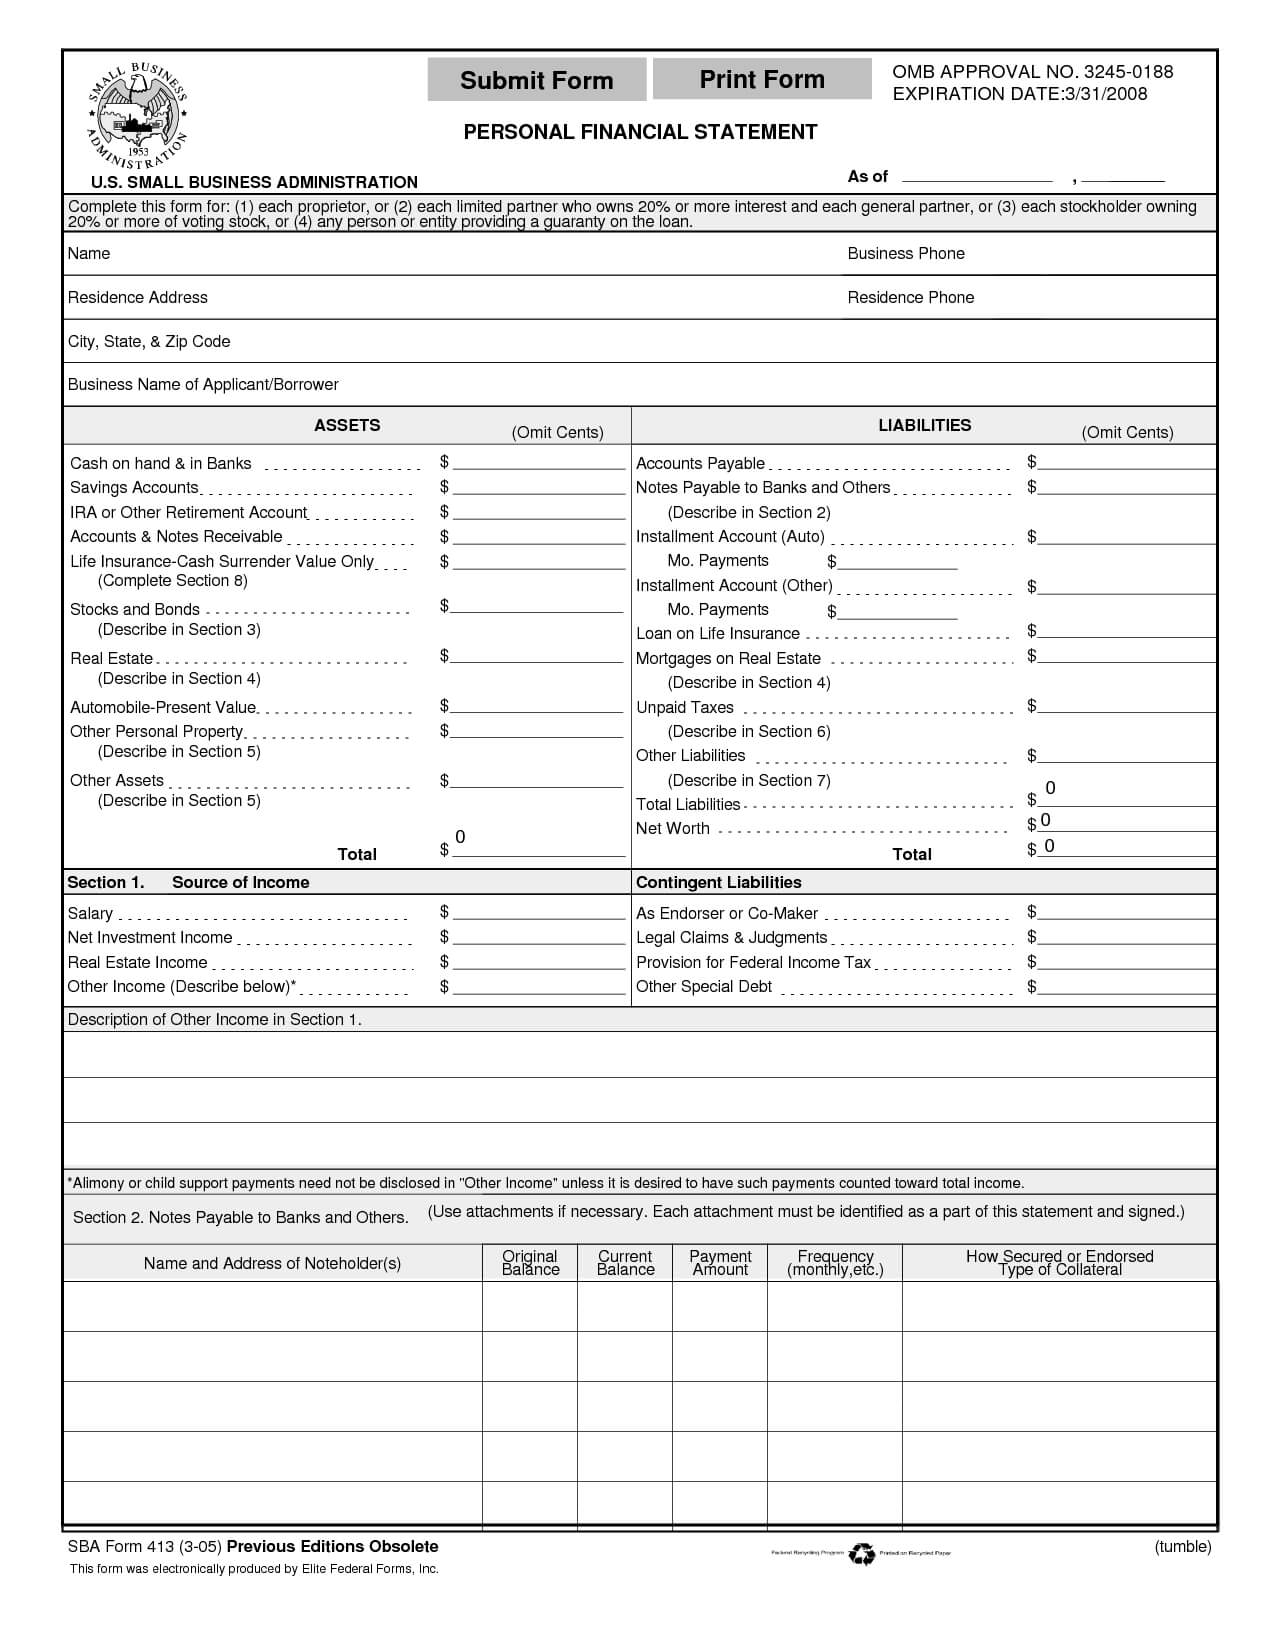 Personal Financial Statement Blank Form Excel – Forza With Blank Personal Financial Statement Template